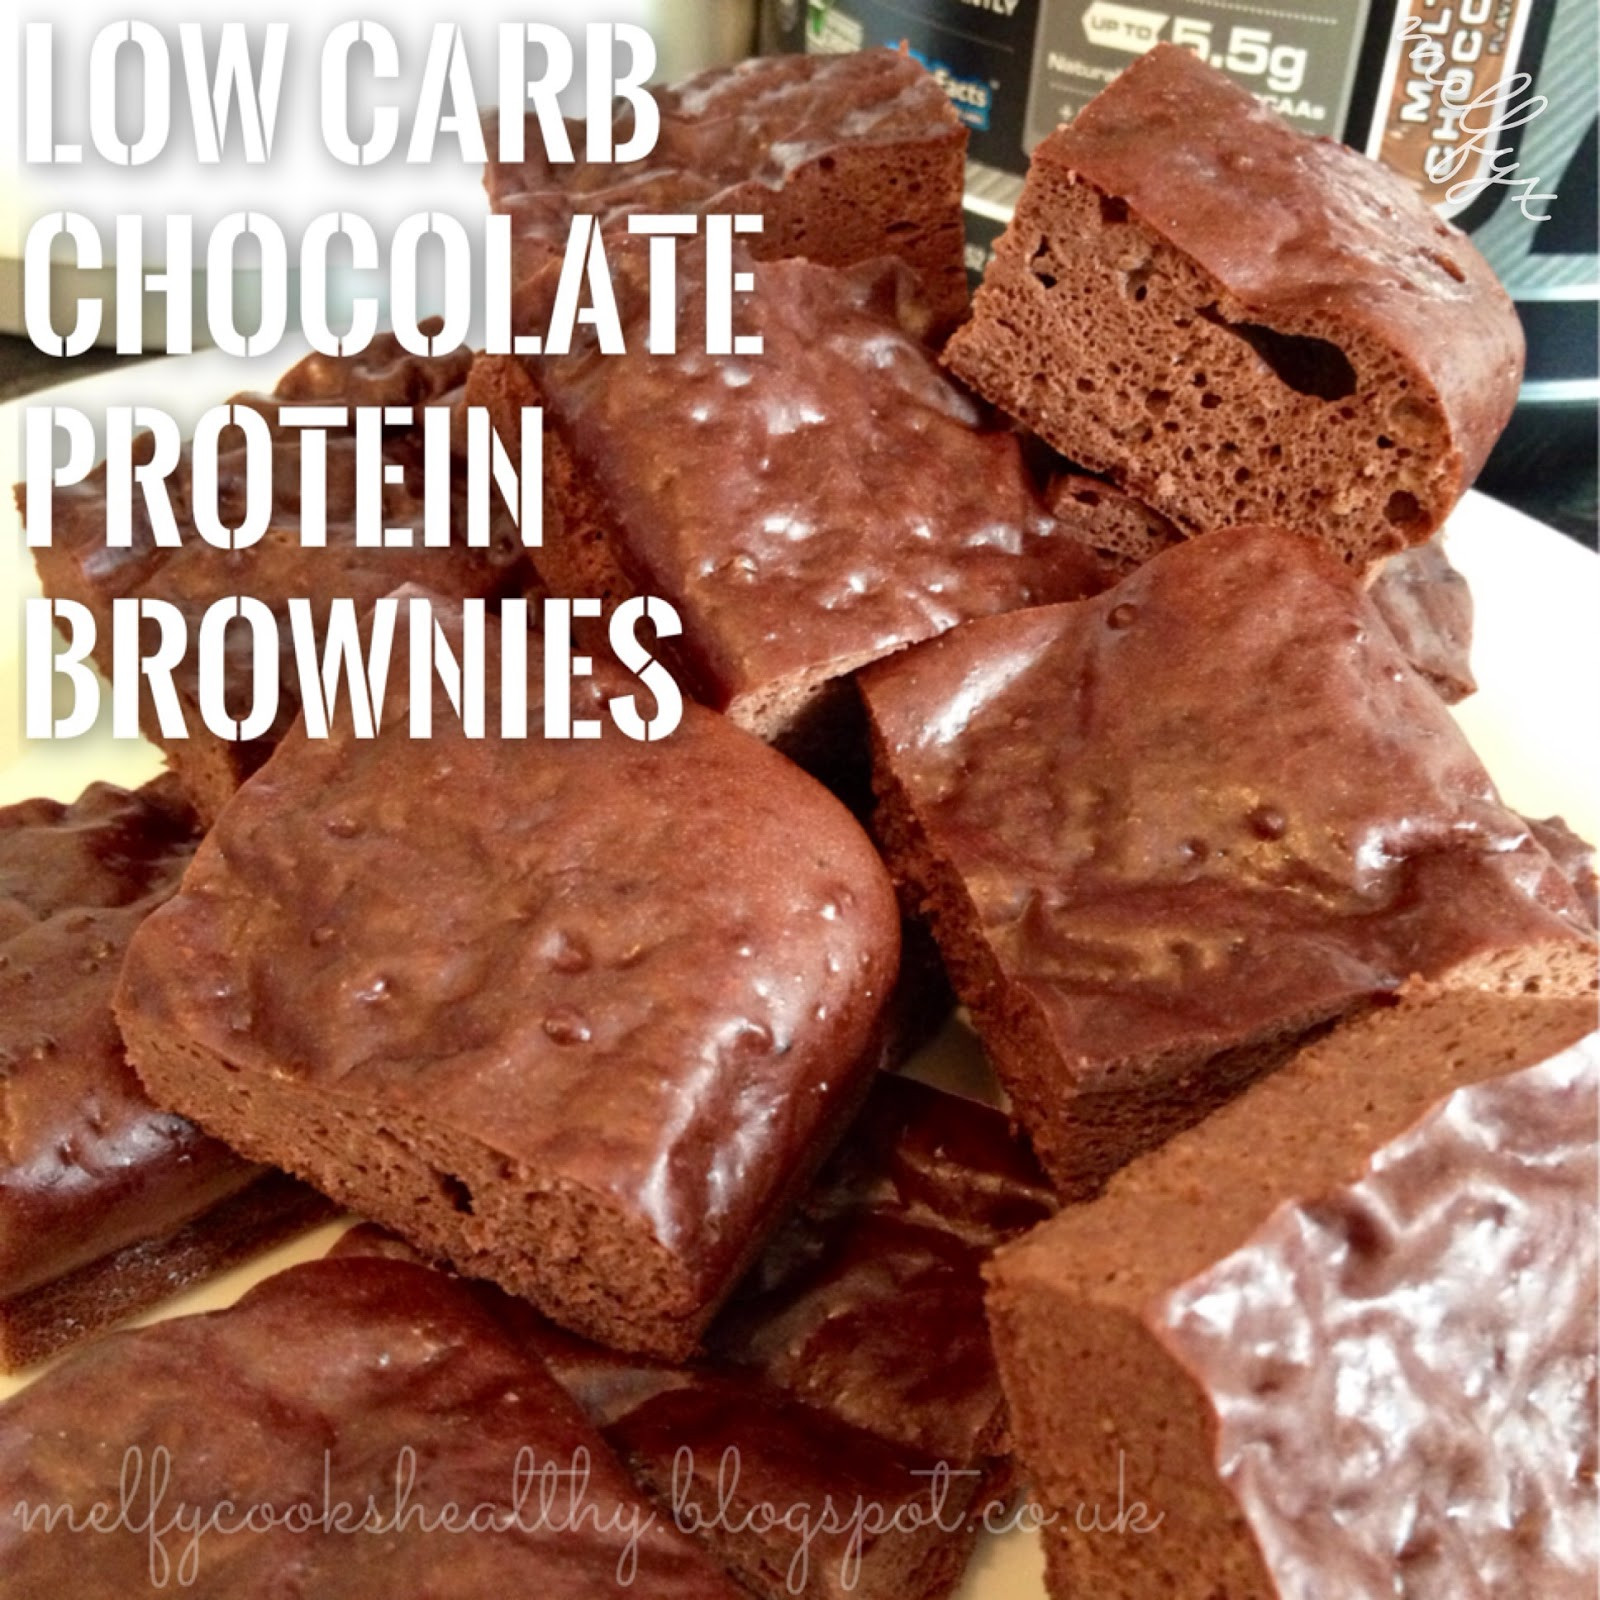 Low Carb Cocoa Powder
 Melfy Cooks Healthy Low Carb Chocolate Protein Brownies